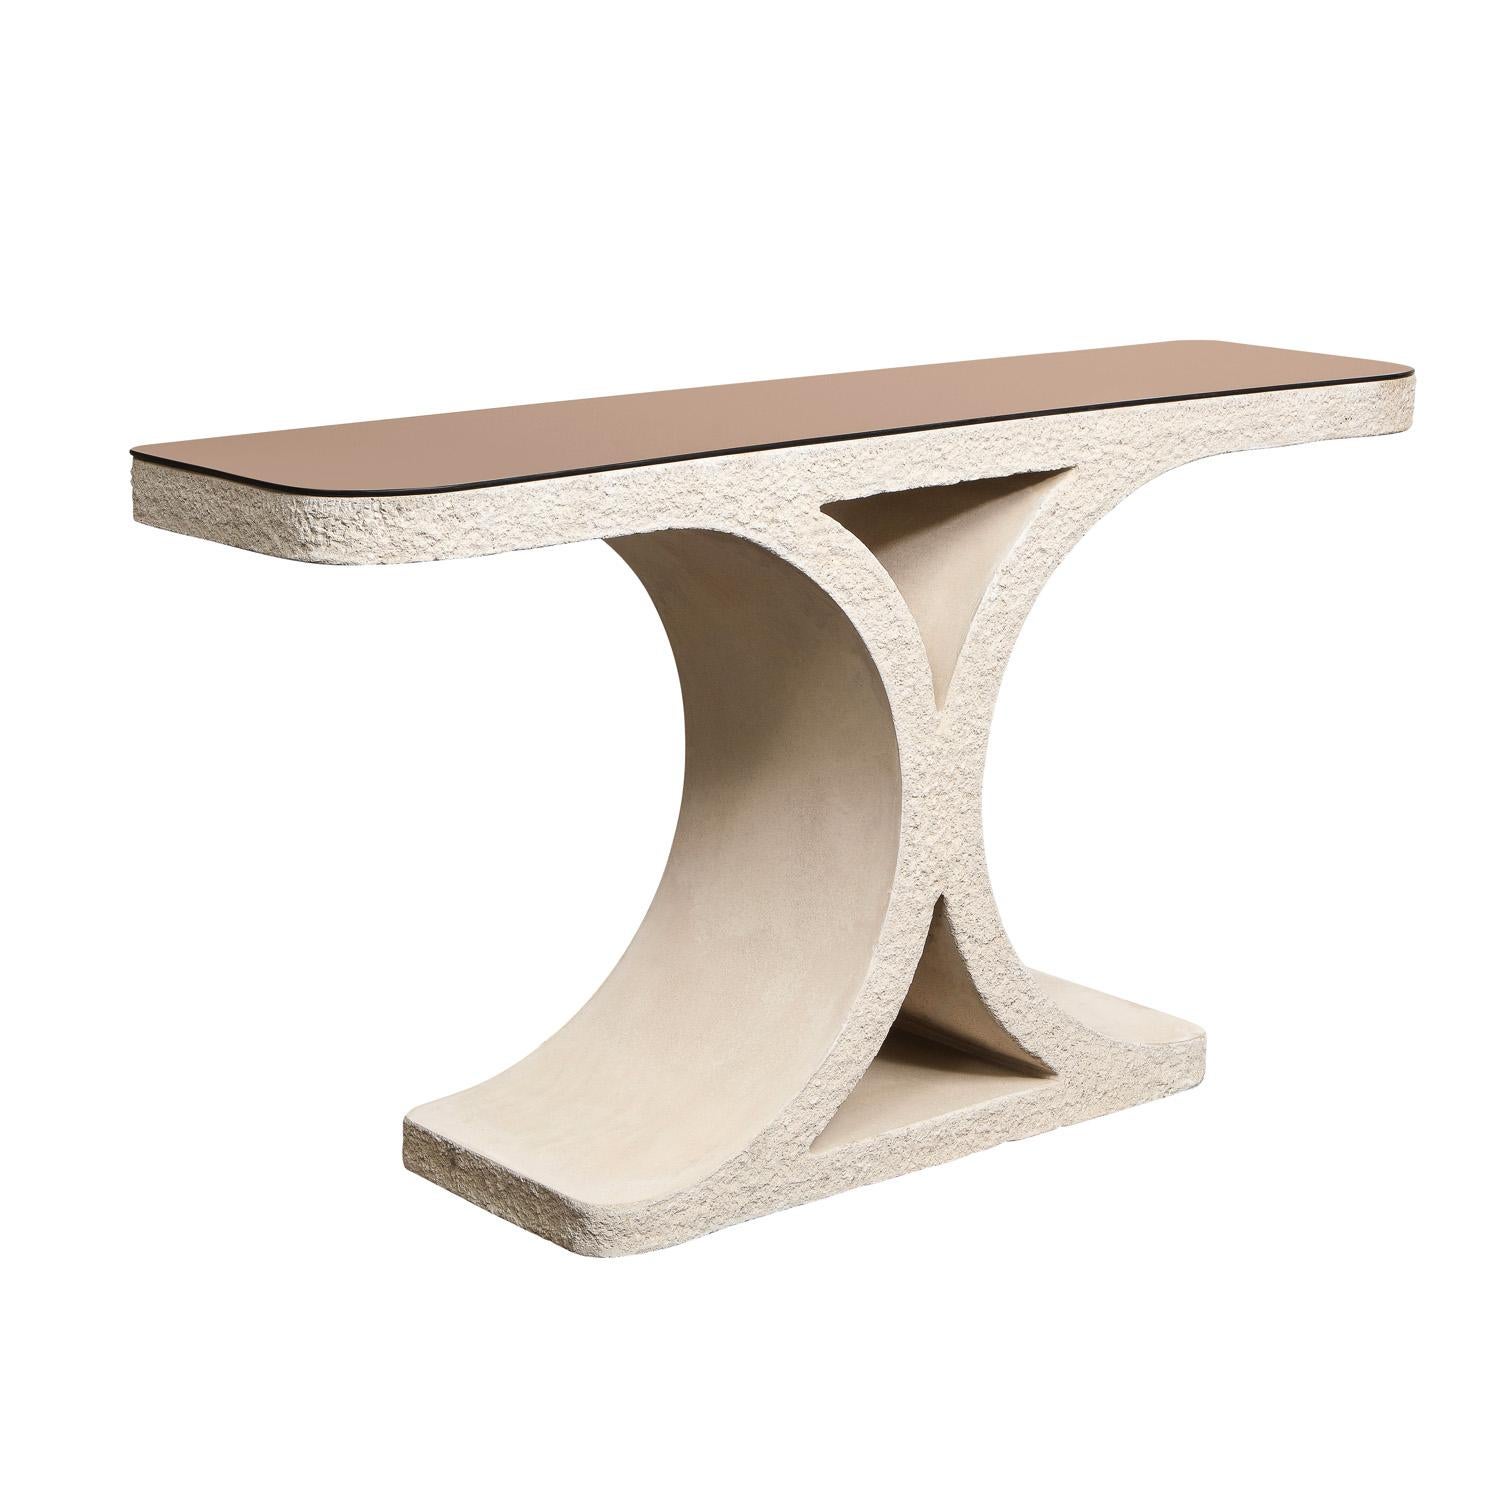 Rare and exceptional “J.M.F. Sandstone Console” table in cast sandstone with bronze mirror top by Karl Springer American, 1980's. This console is a testament to Springers craftsmanship and mastery of materials. It’s a work of